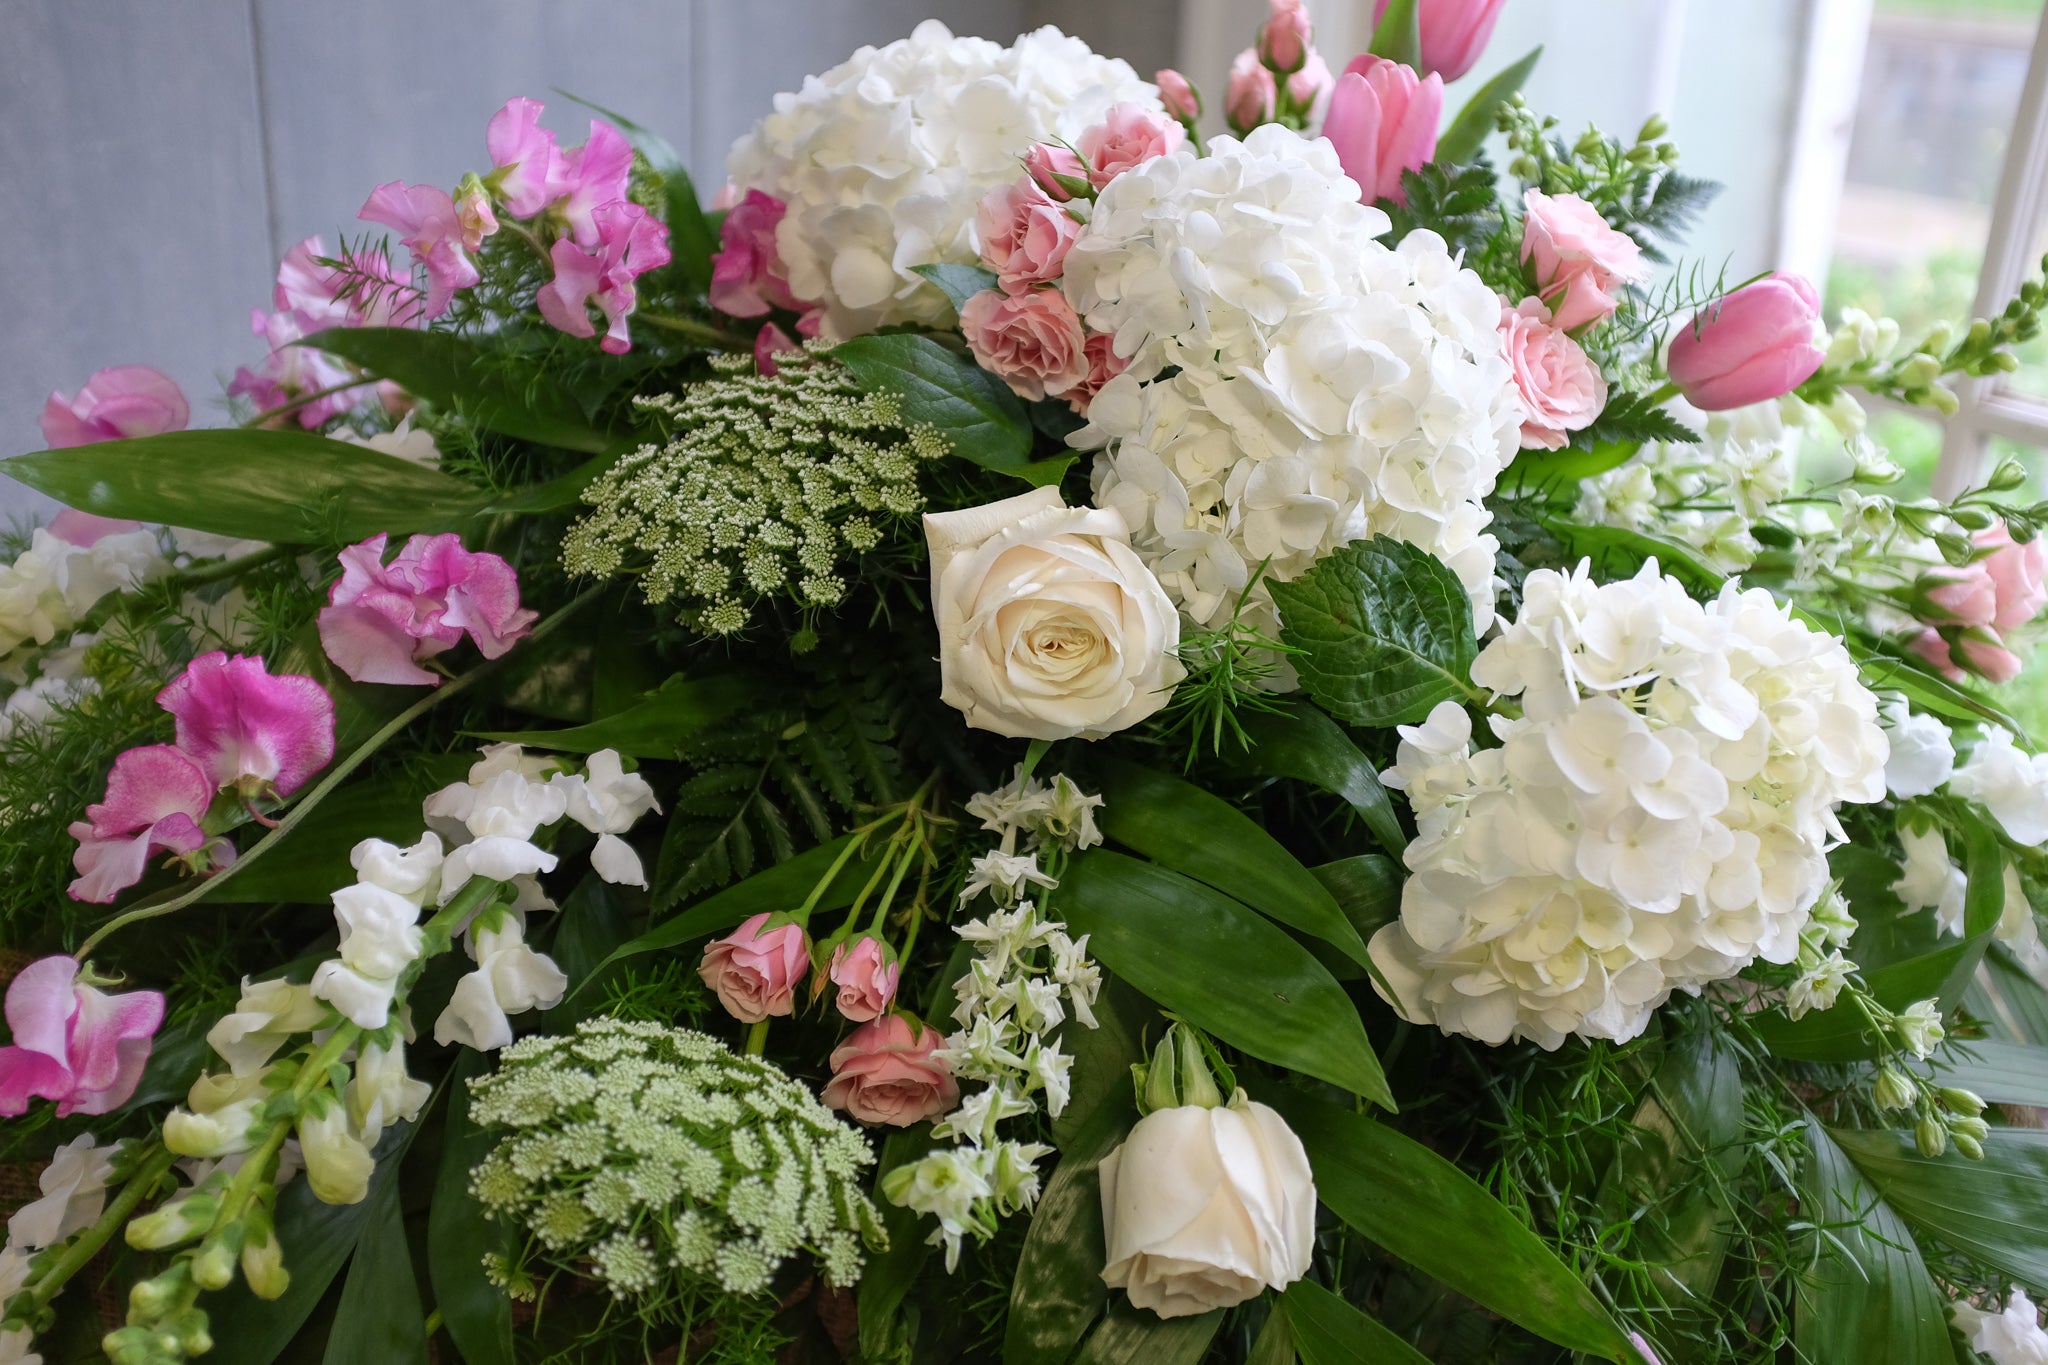 Close up image of floral details on a casket spray in pink and white with snapdragons, roses, hydrangea and tulips.